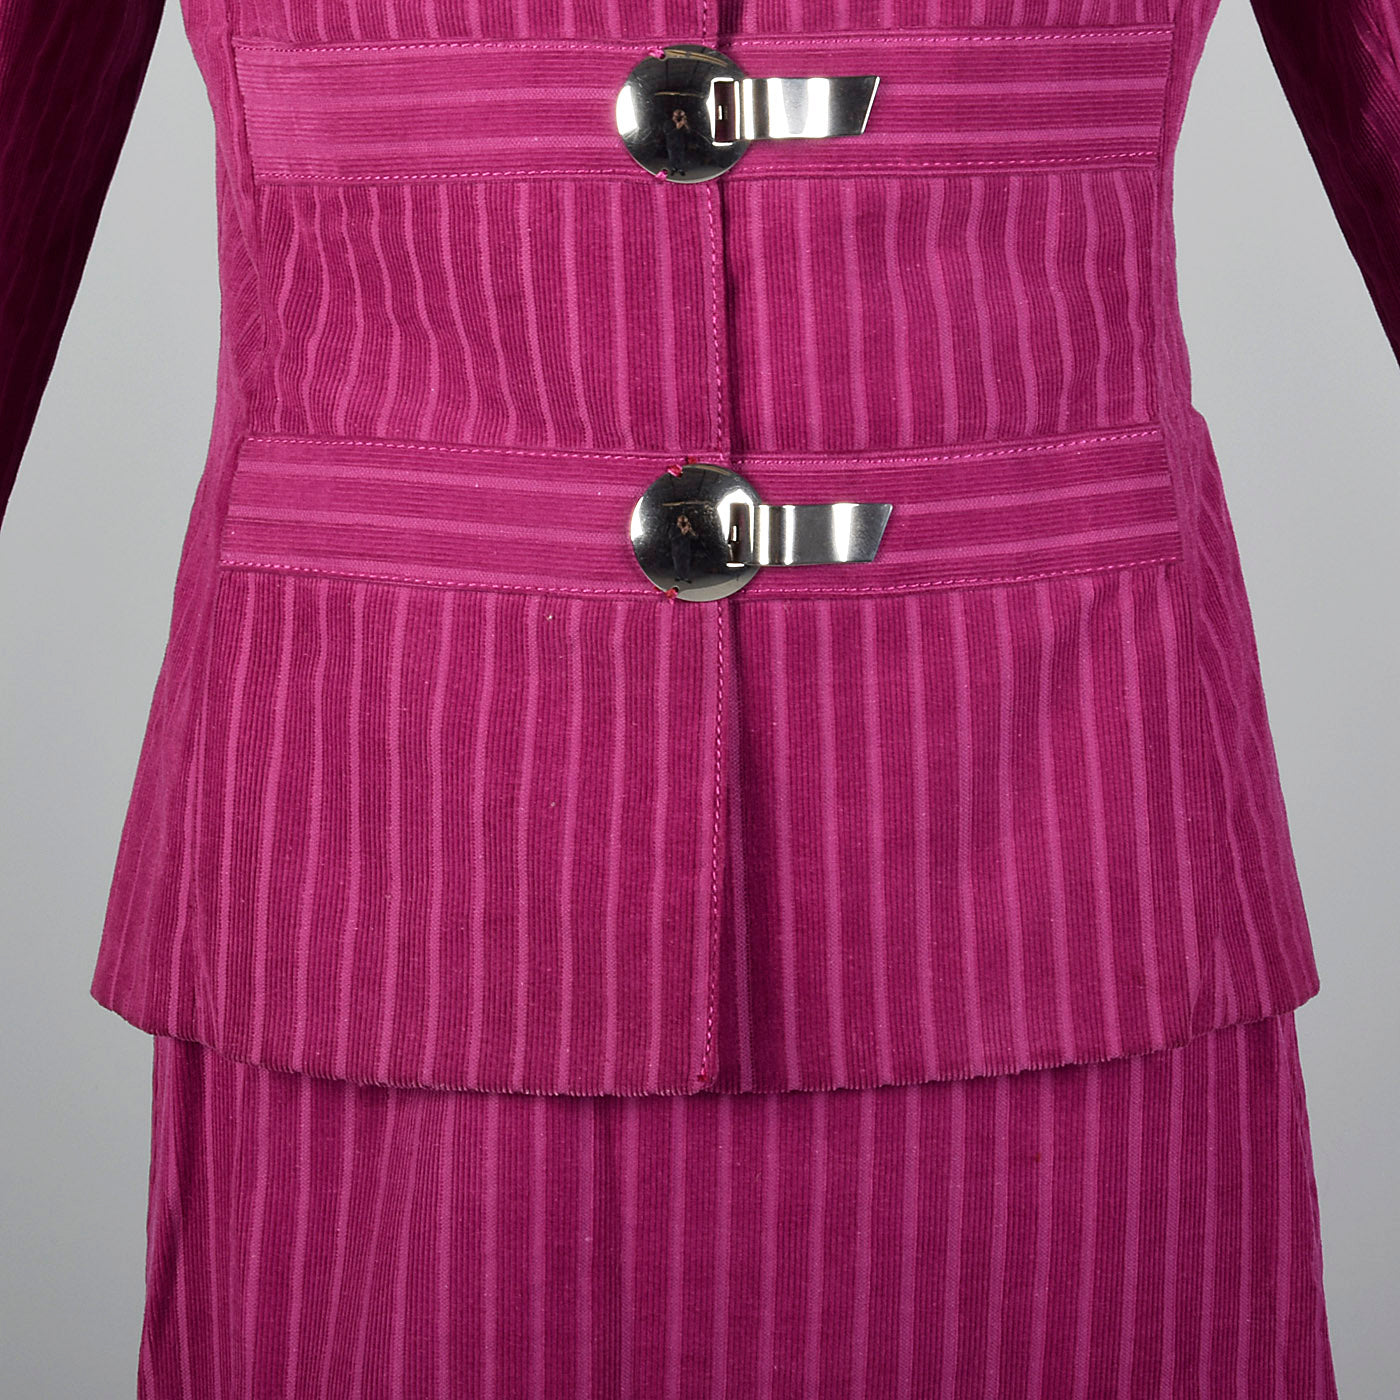 1960s Pink Corduroy Skirt Suit with Mod Silver Clasp Closures